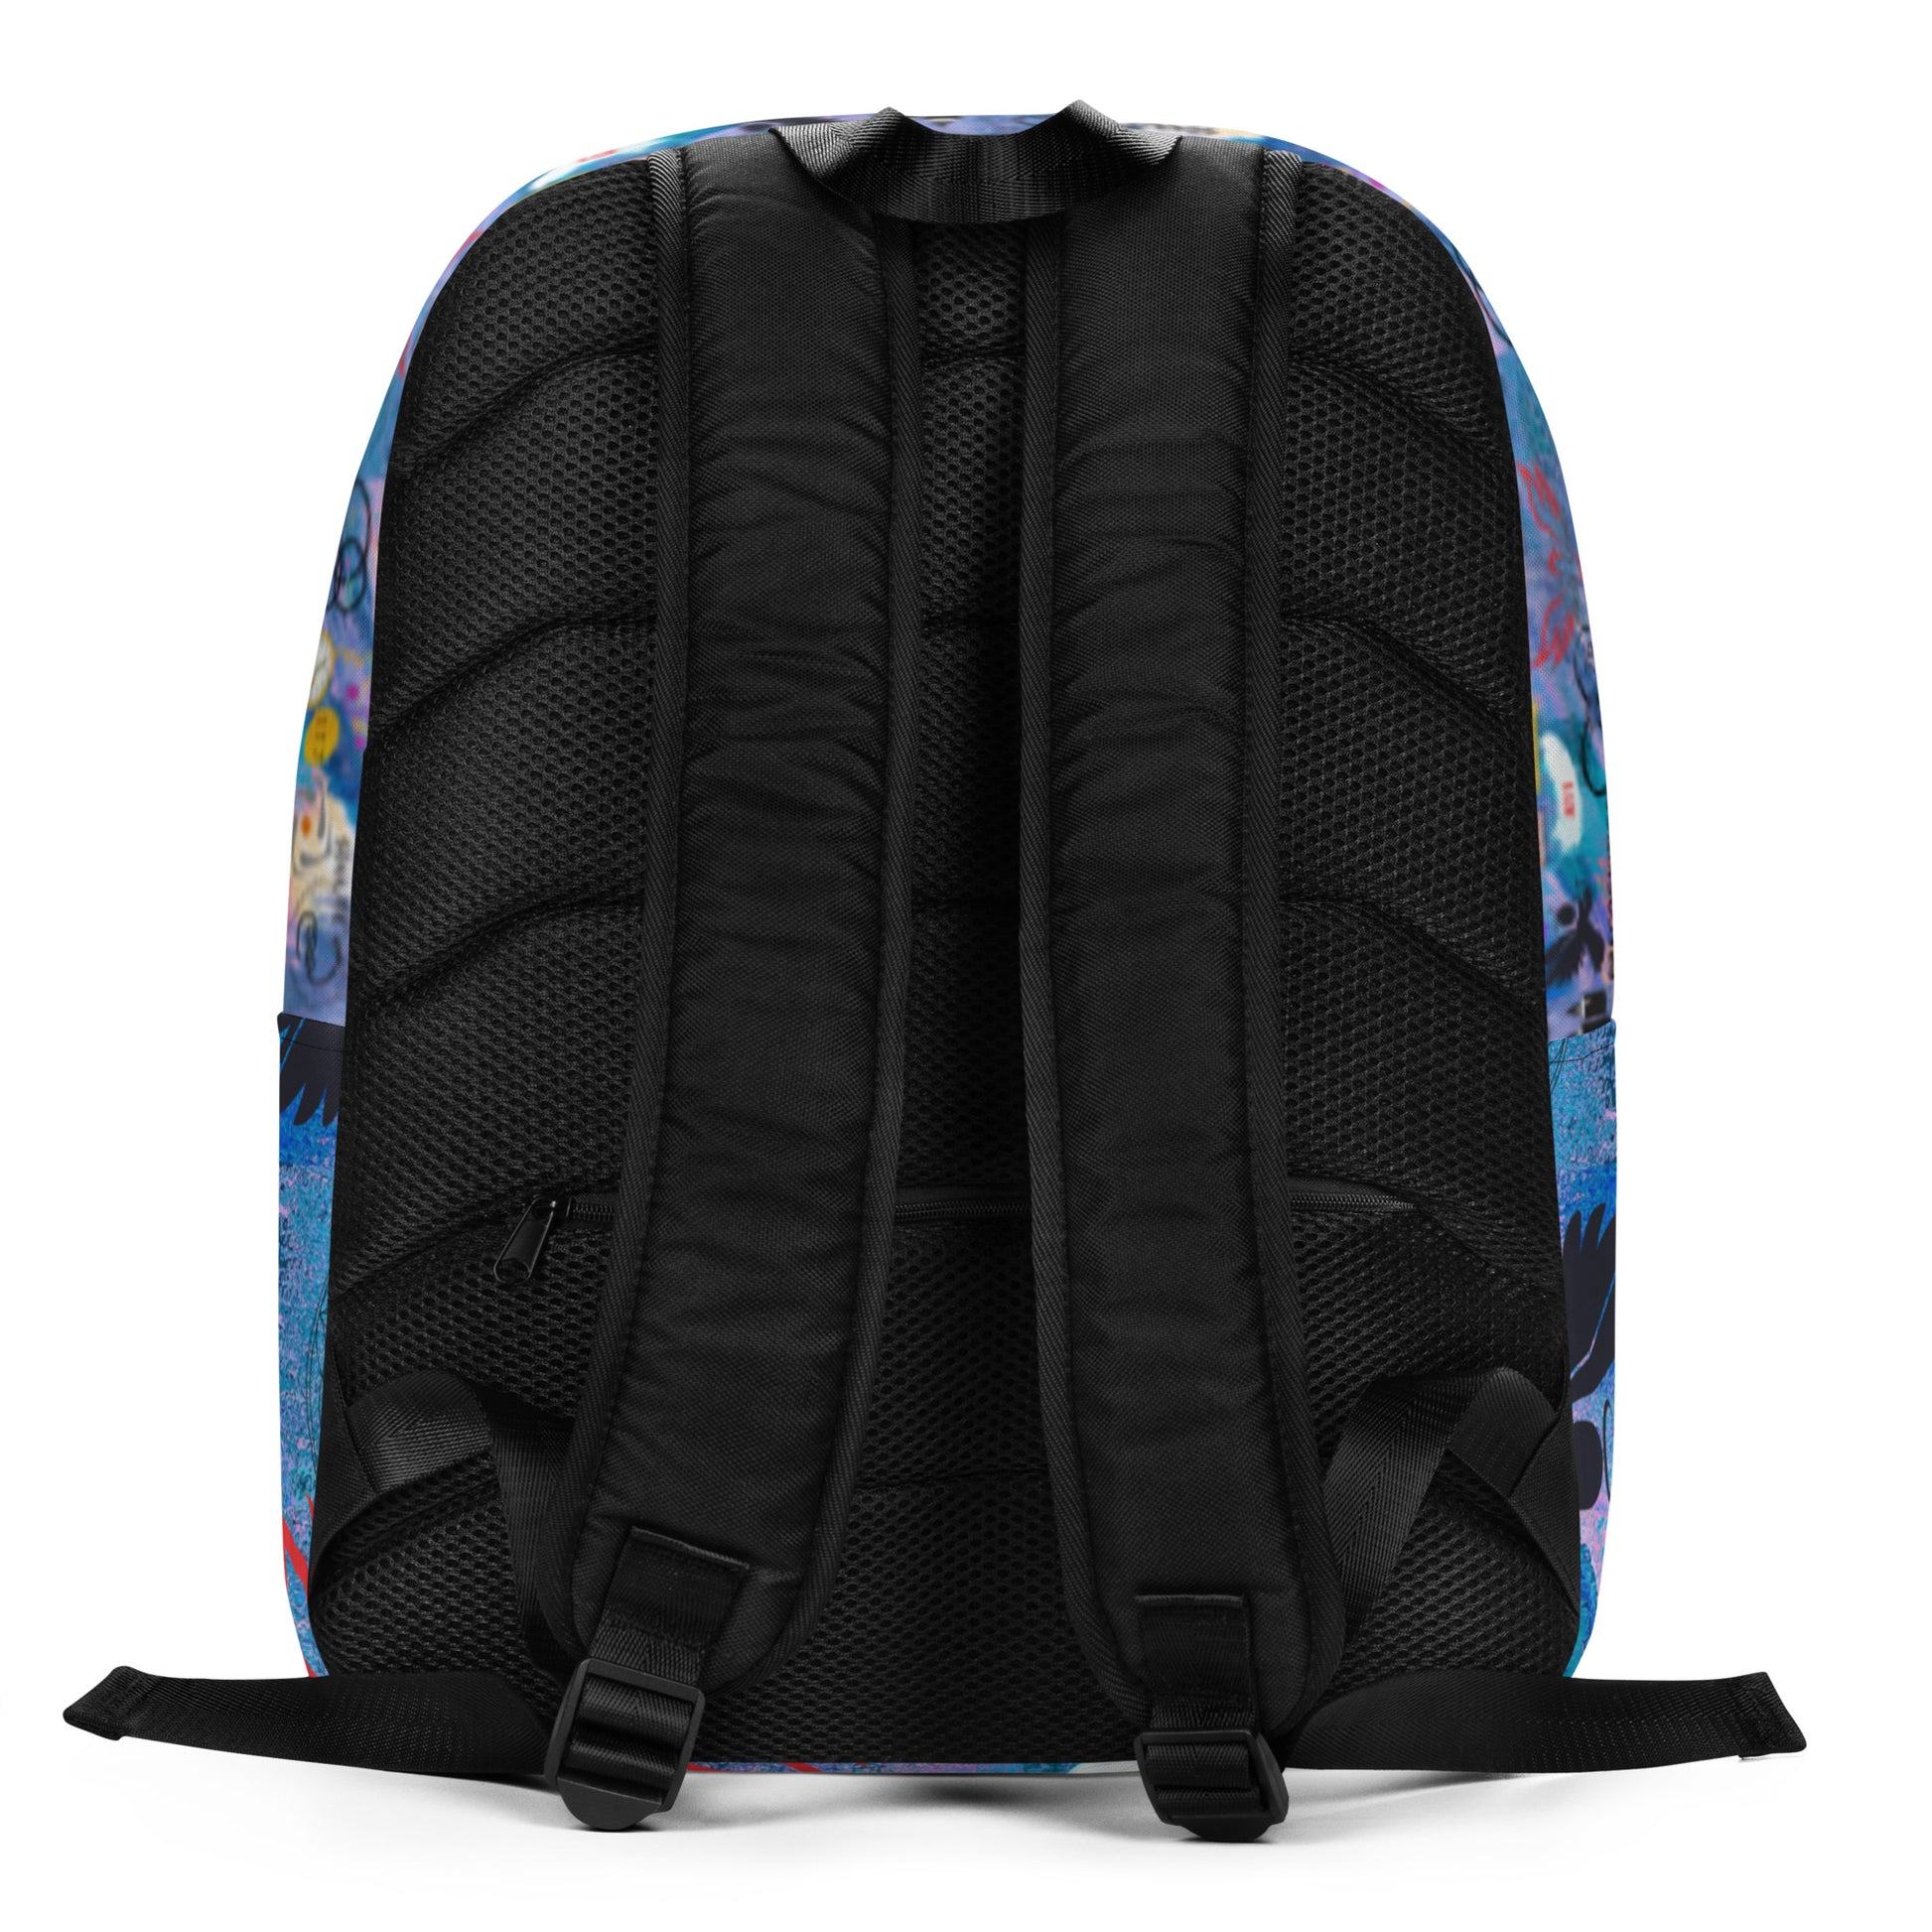 All-over print bluish/purple, minimalist backpack, back with padded ergonomic bag straps (all black). Spiritual images and words of death, rebirth, transformation, reincarnation, love, and spiritual awakening. Otherworldly quote, "See You Next Lifetime," with angel numbers, angel, candles, hearts, feather, musical notes, phoenix, butterfly, infinity symbol, stars, circles, pocket watch, dream catcher, and dreamer in bed having premonitions. JAMILLIAH'S WISDOM IS TIMELESS SHOP - wisdomistimeless.com.